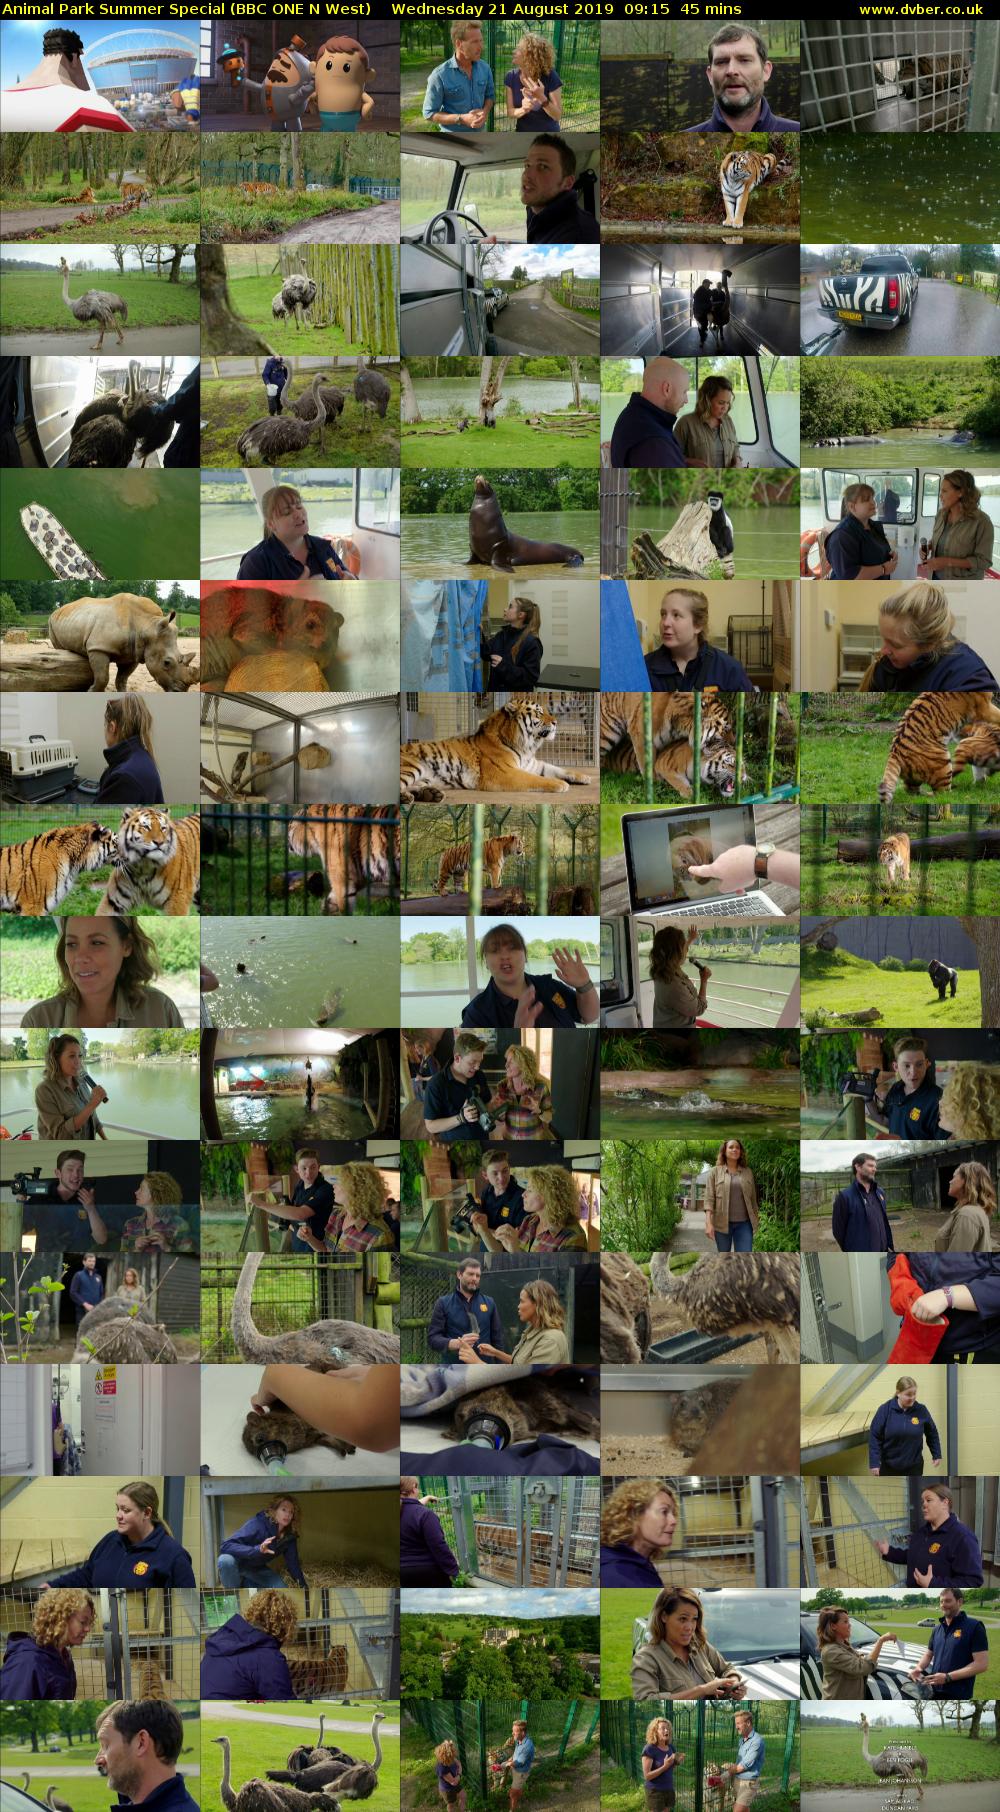 Animal Park Summer Special (BBC ONE N West) Wednesday 21 August 2019 09:15 - 10:00